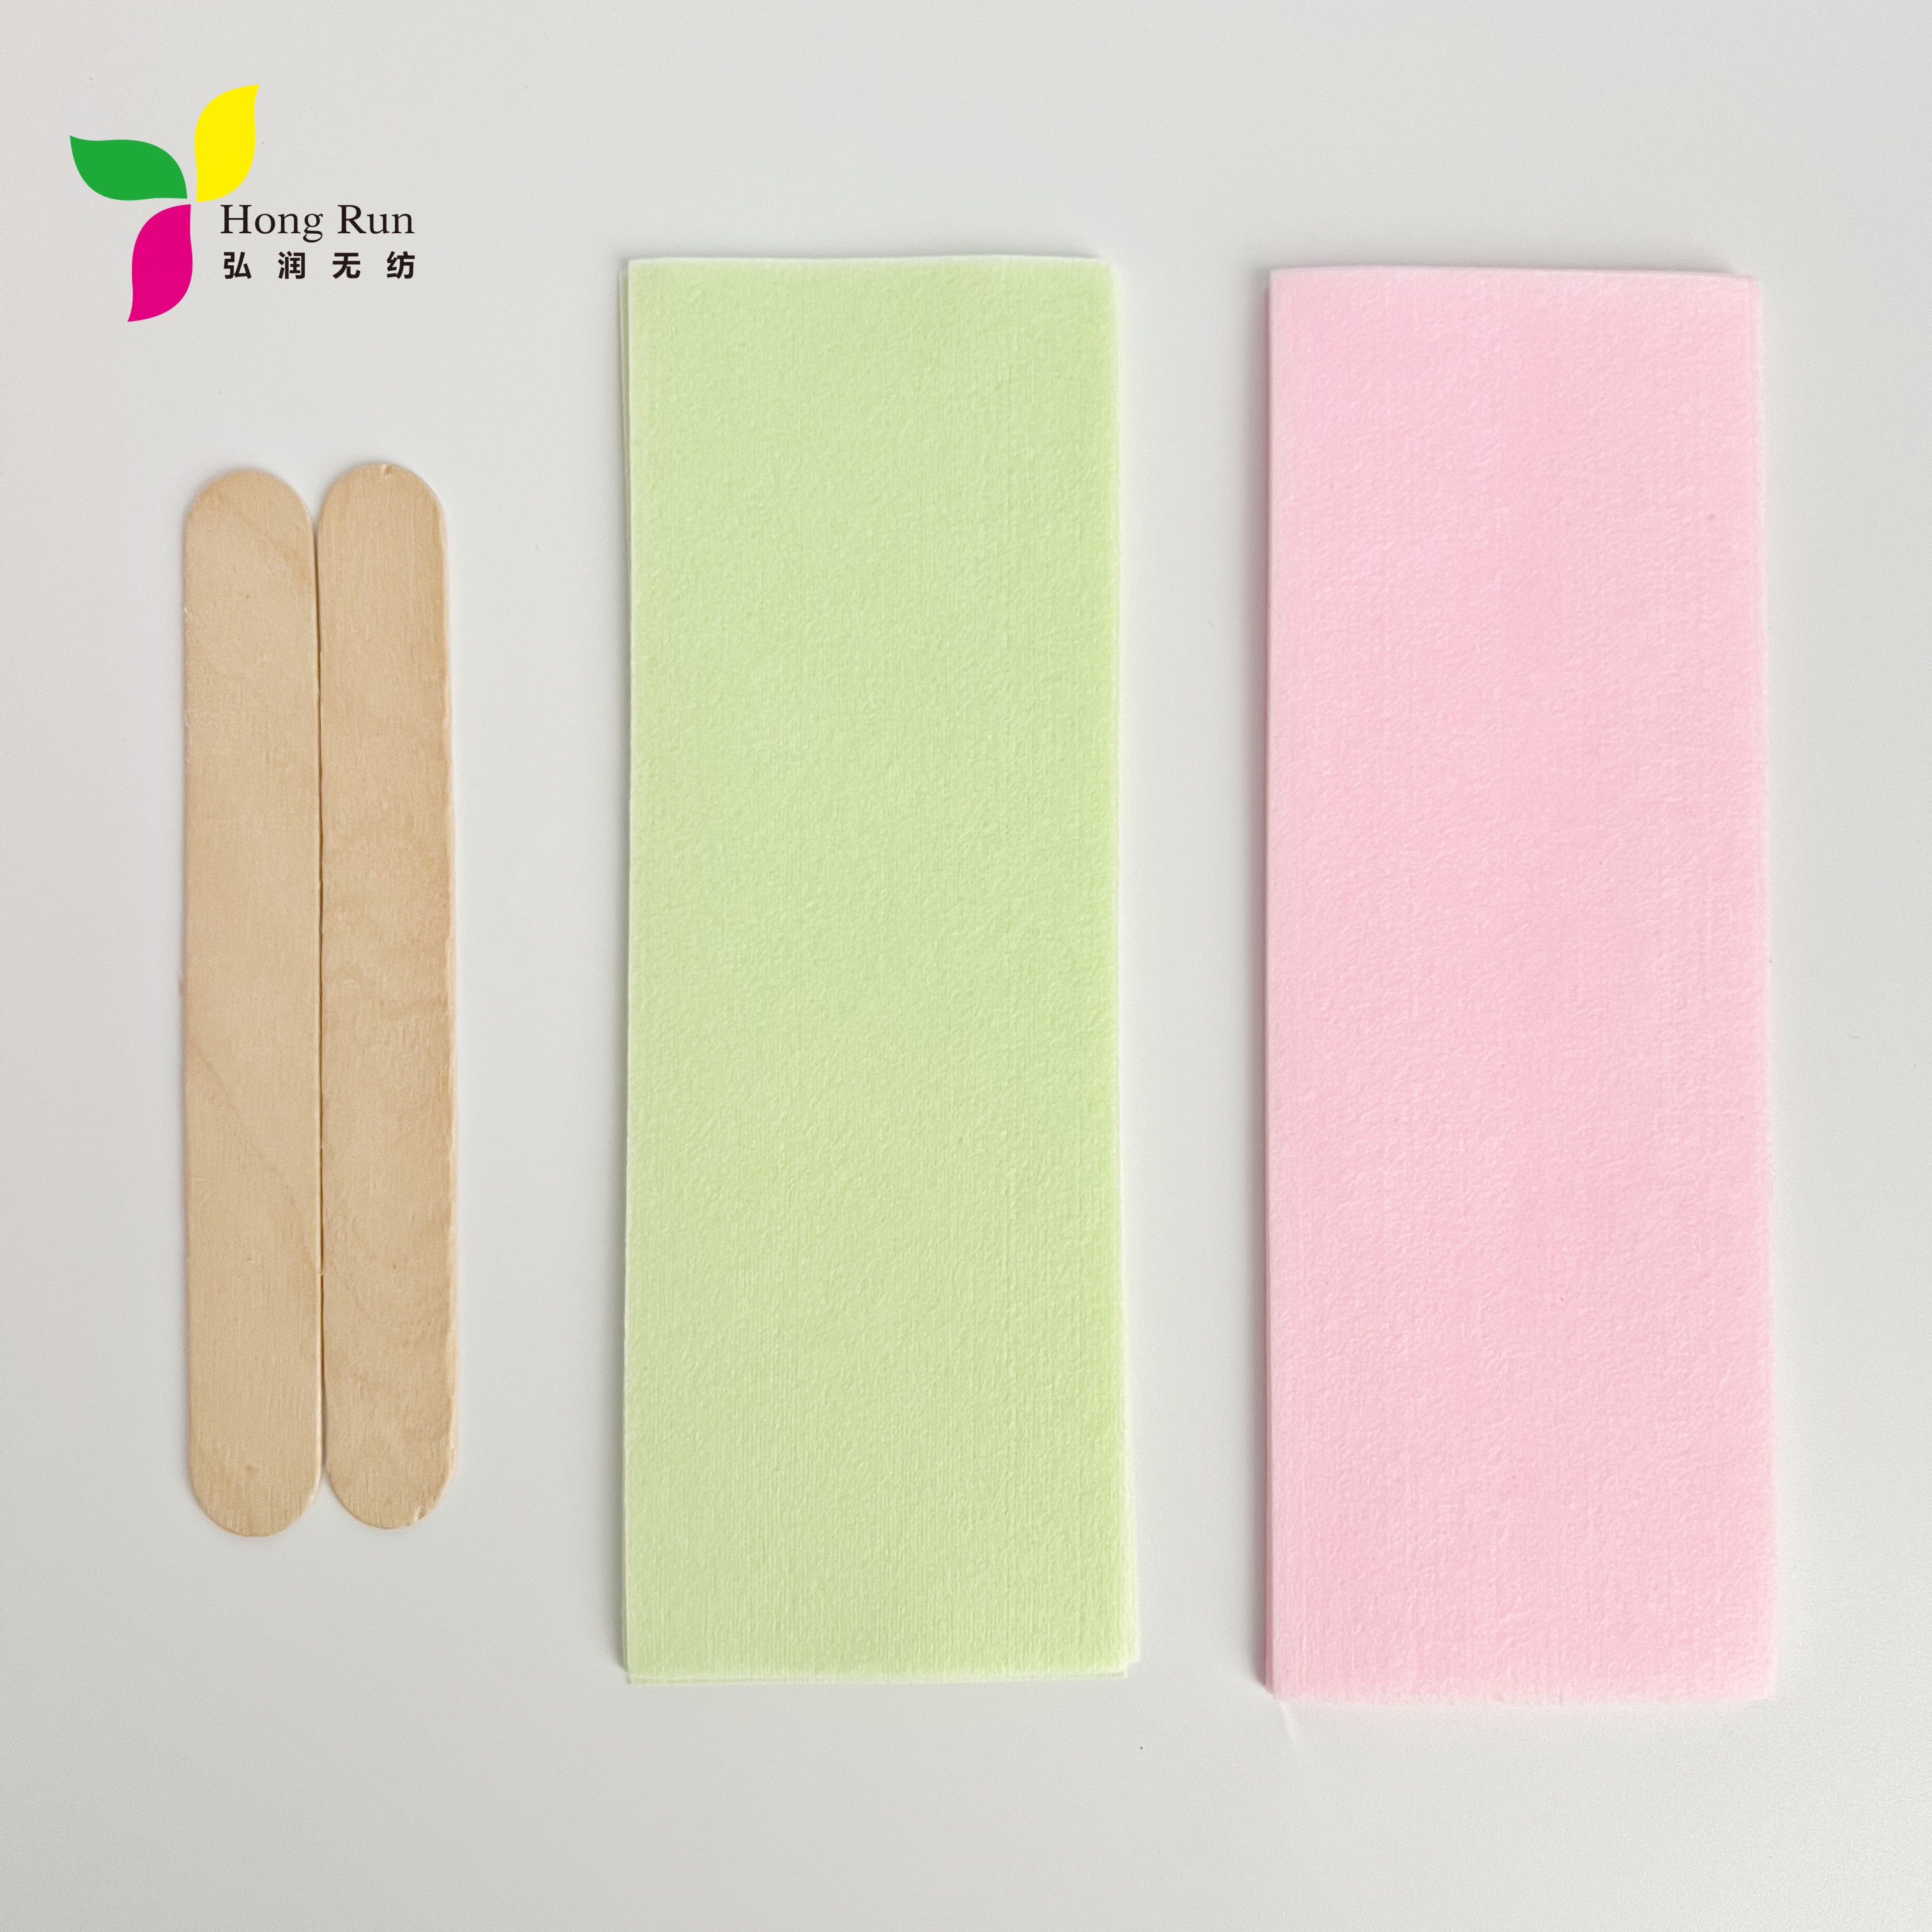 Wholesales hair removal wax strips use for body beauty in home or beauty SALON